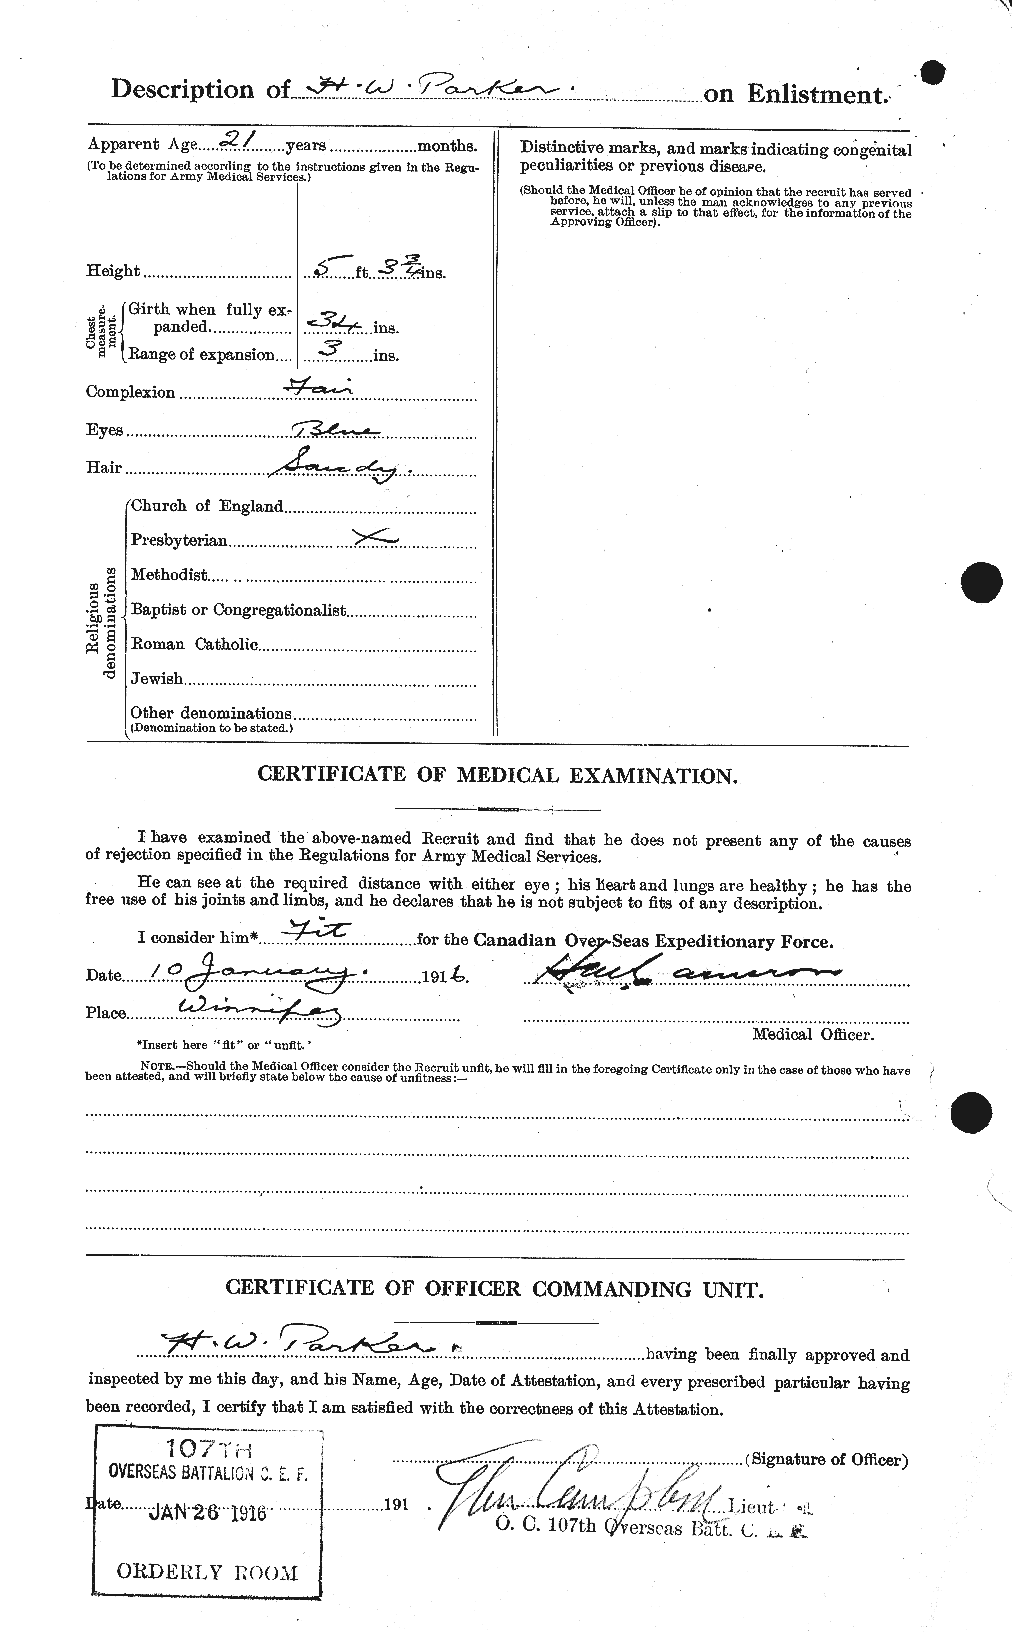 Personnel Records of the First World War - CEF 565373b